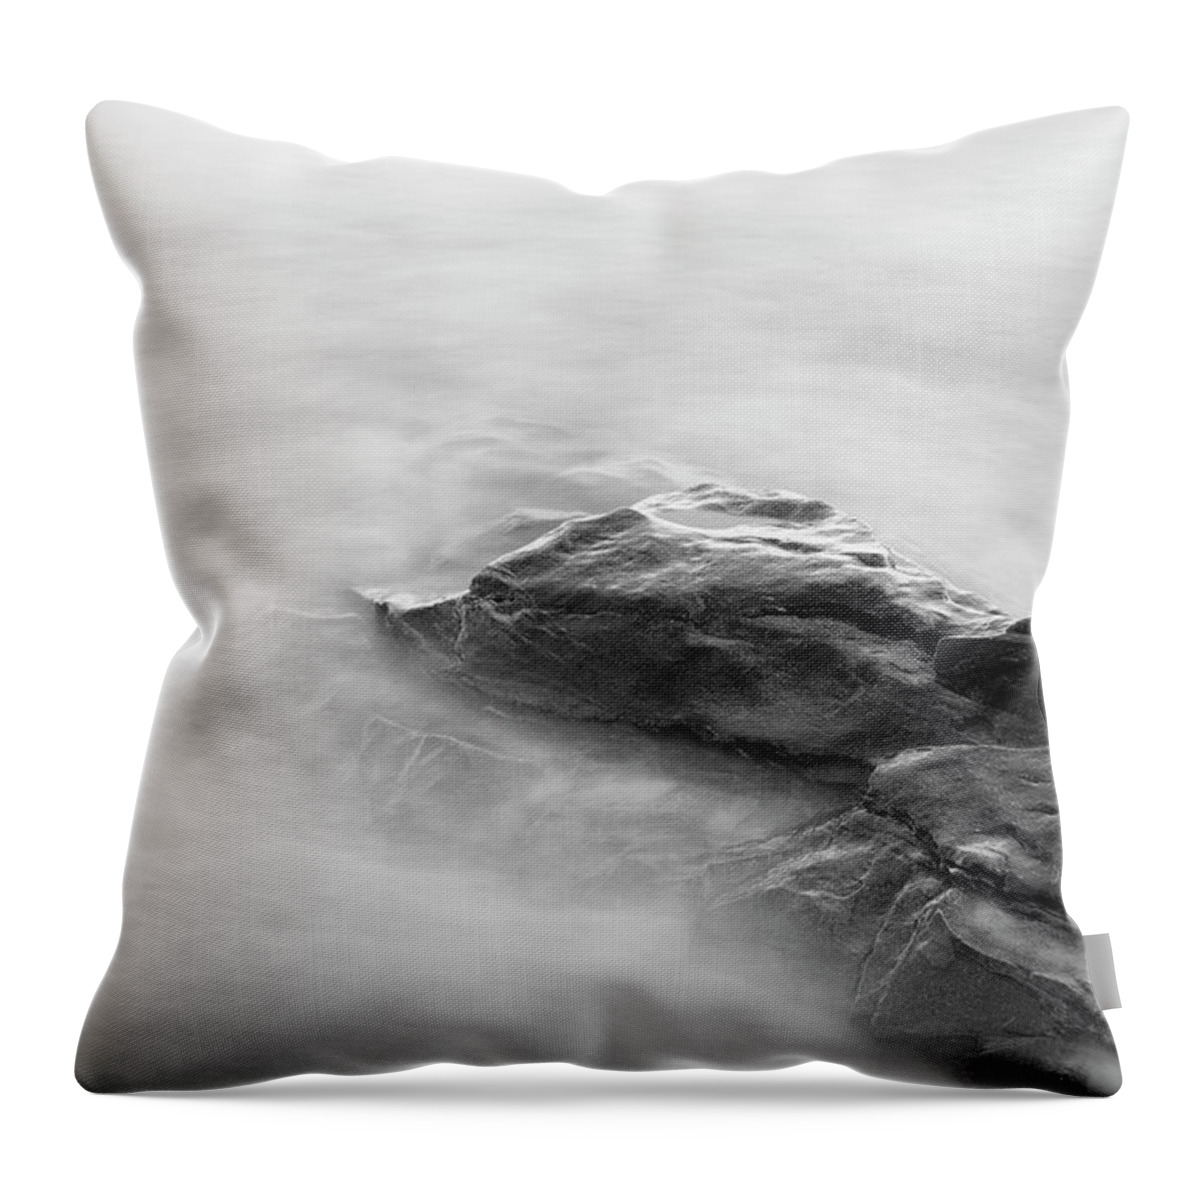 Allens Pond Throw Pillow featuring the photograph Allens Pond XV BW by David Gordon